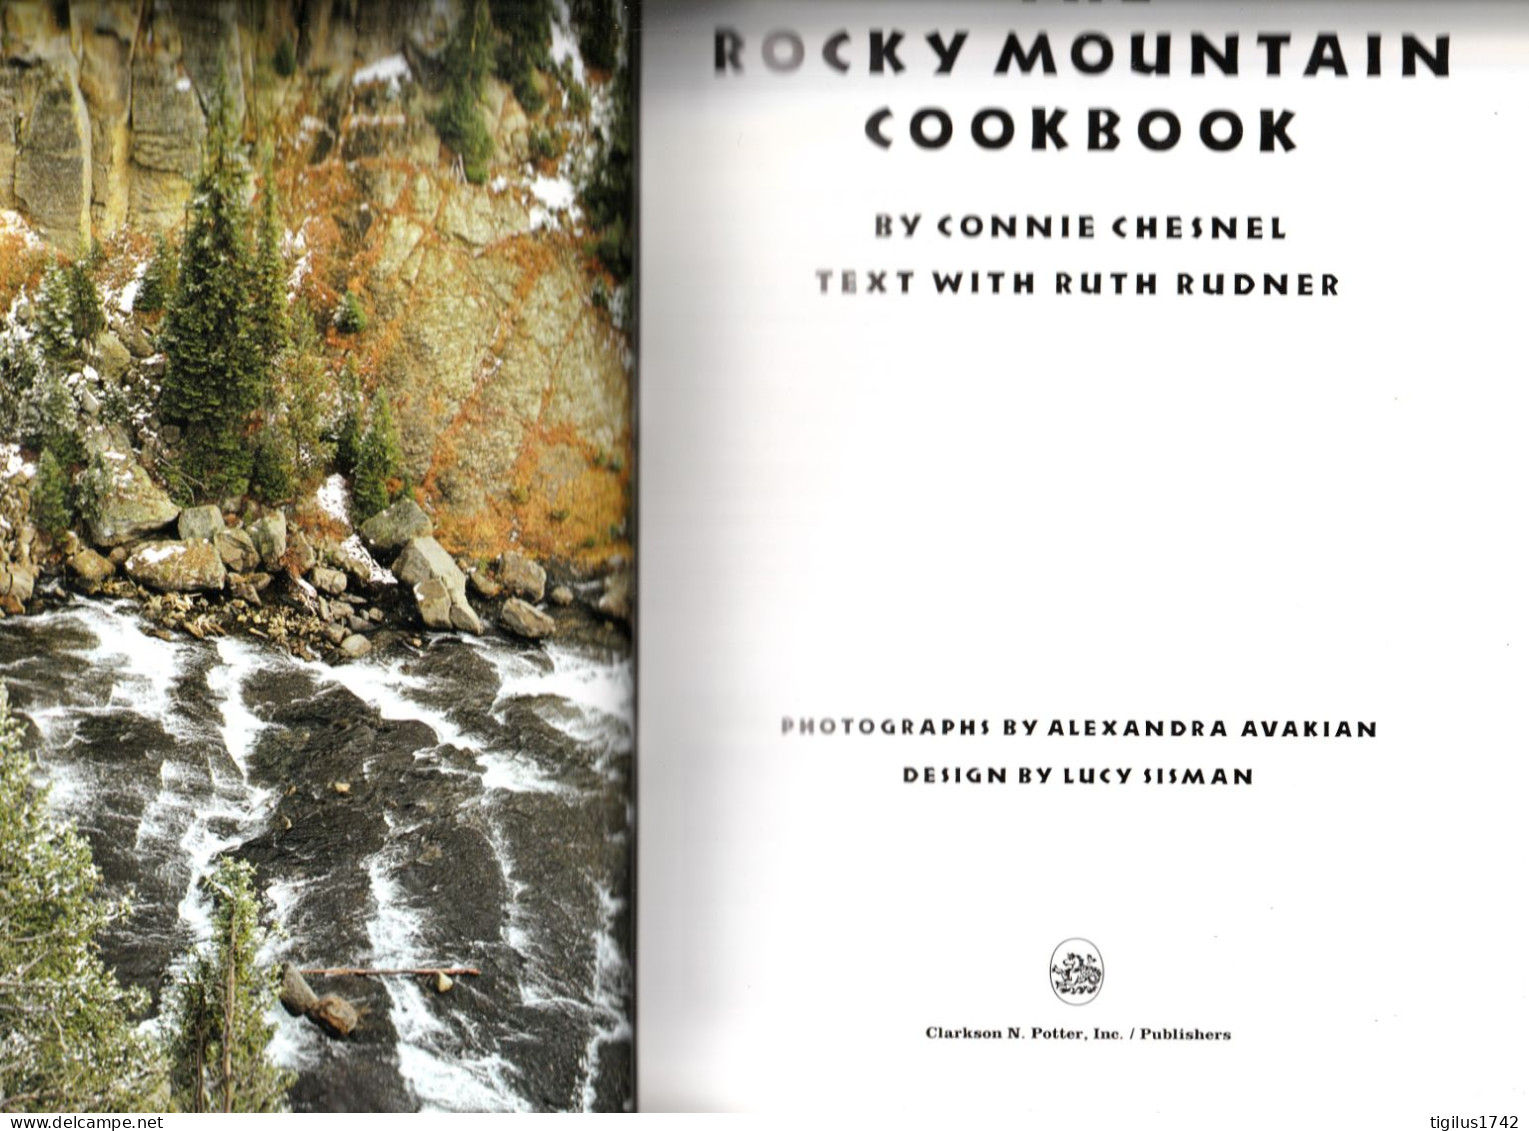 Chesnel Connie And Rudner Ruth. The Rocky Mountain Cookbook. Potter éd., 1988 - Américaine